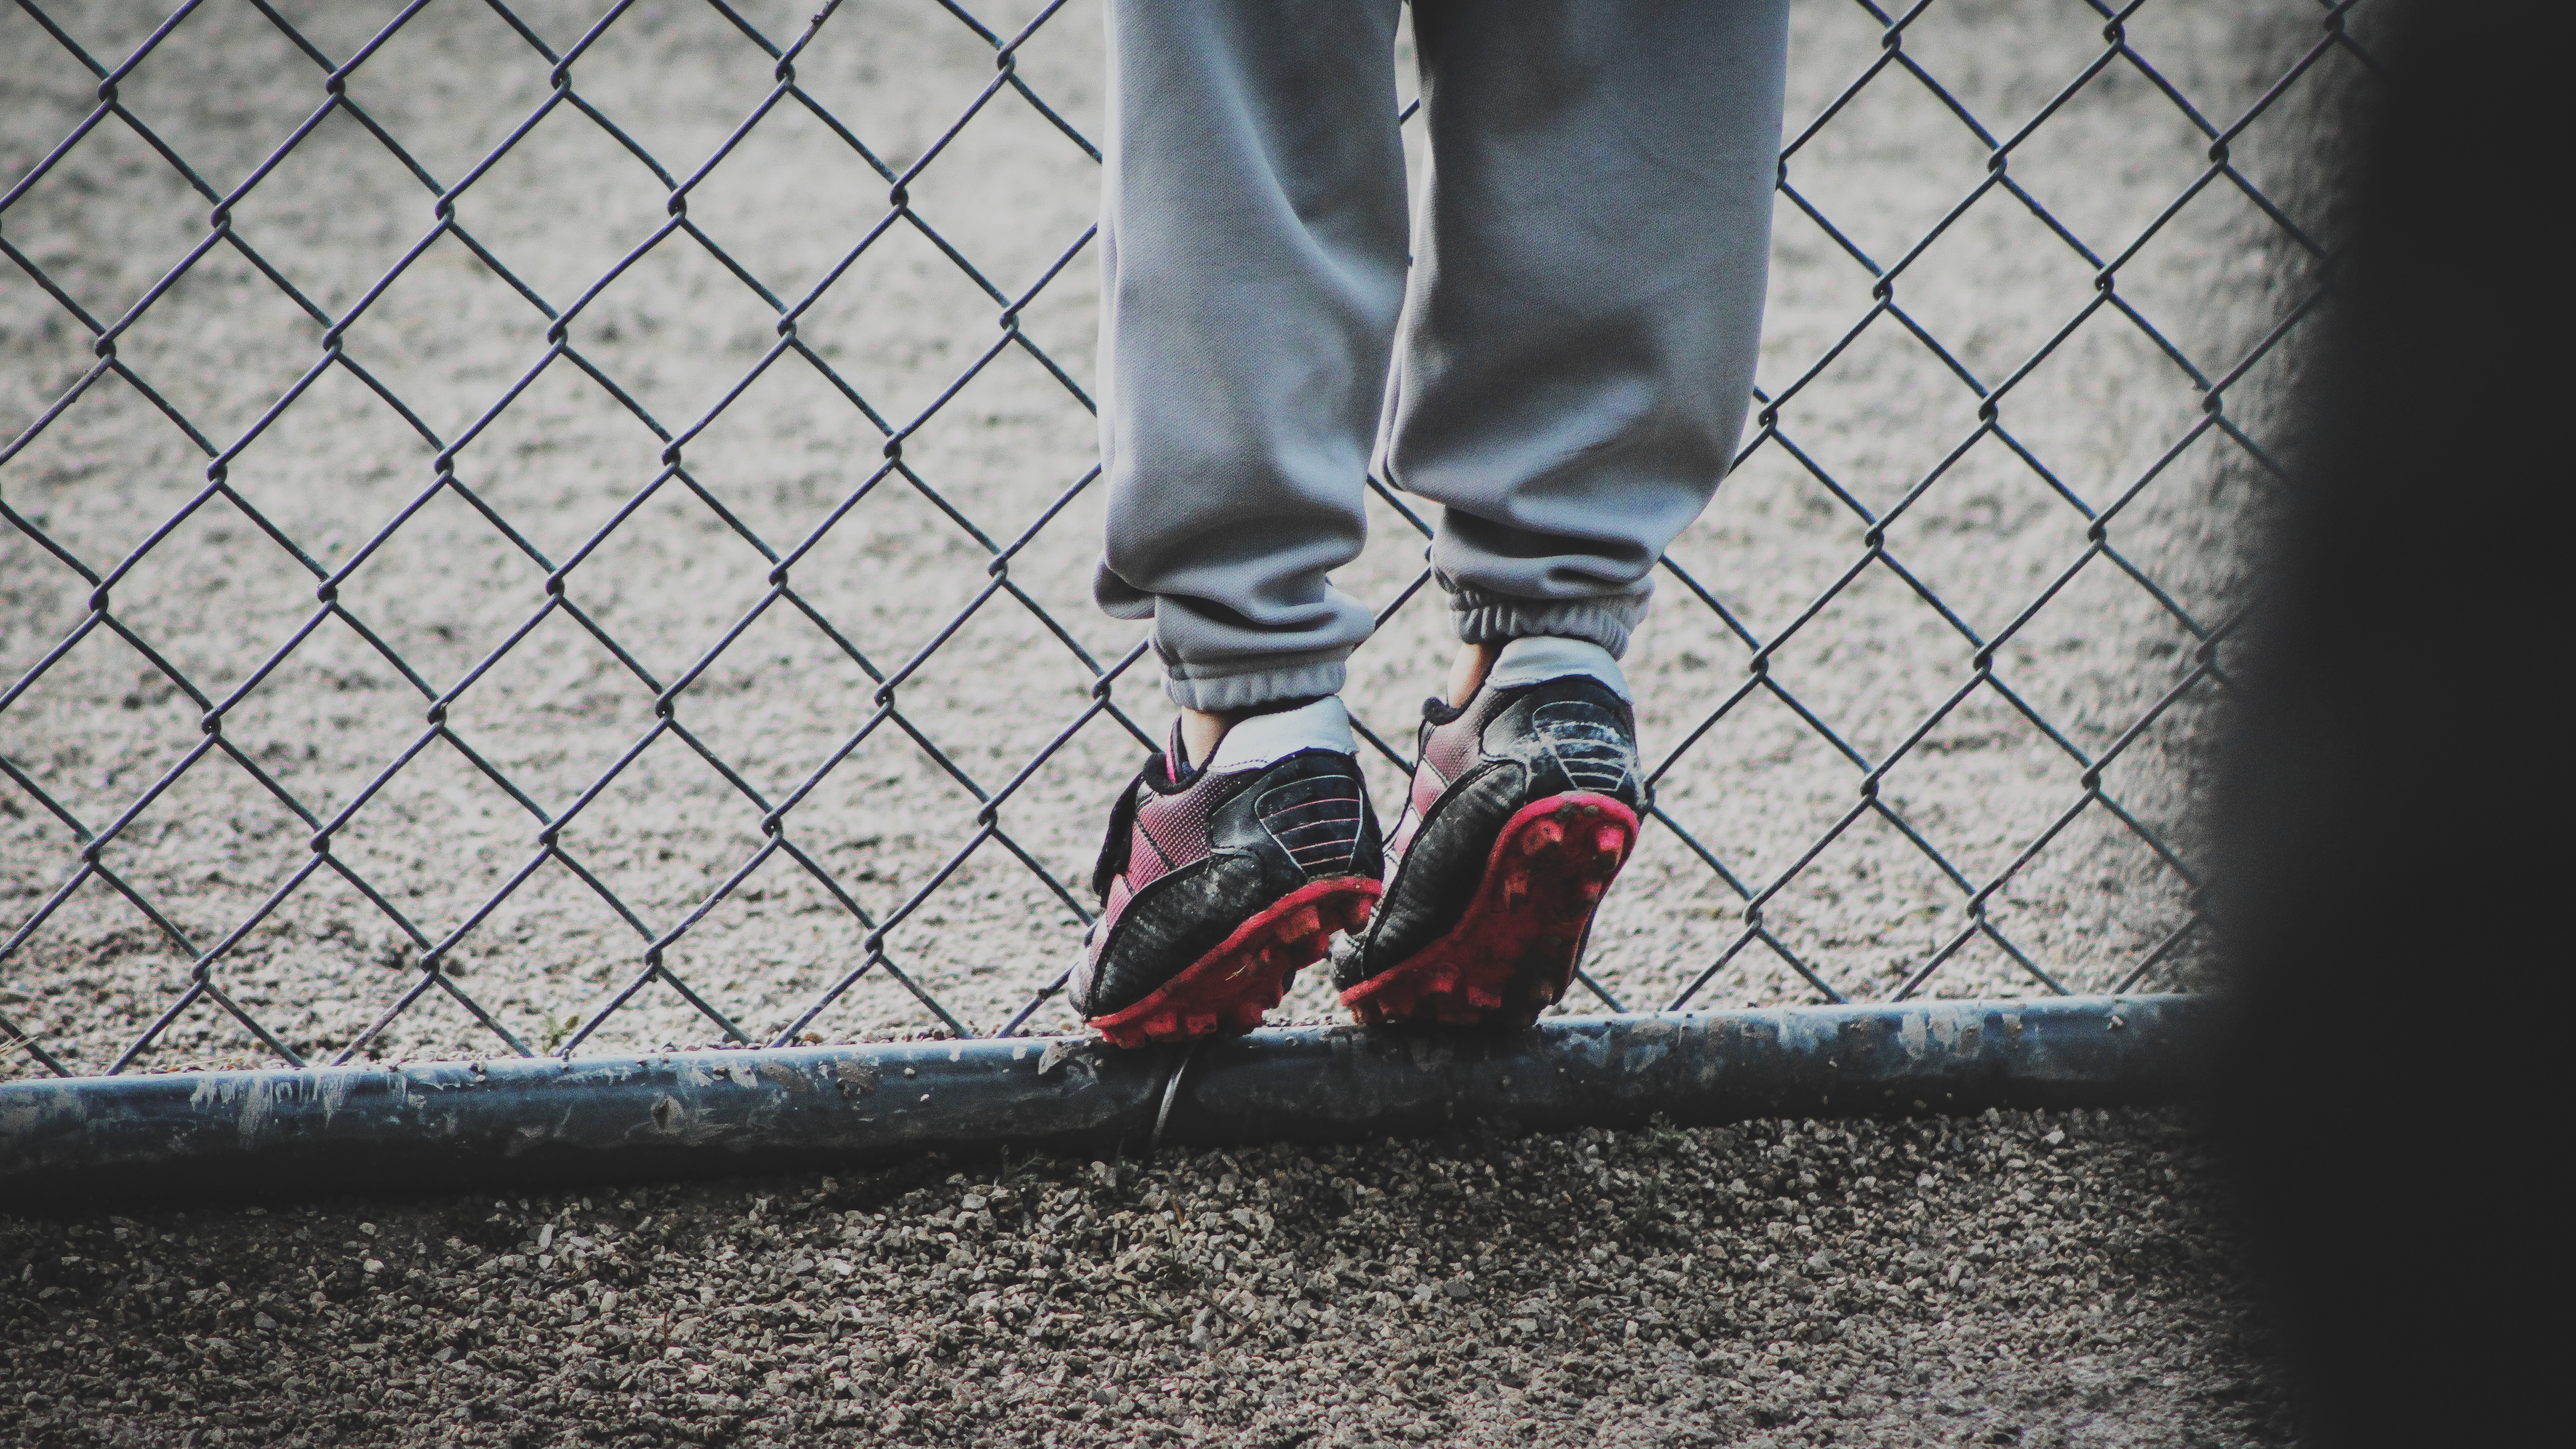 football, miscellanea, miscellaneous, legs, grid, fence, child, cleats, shoes